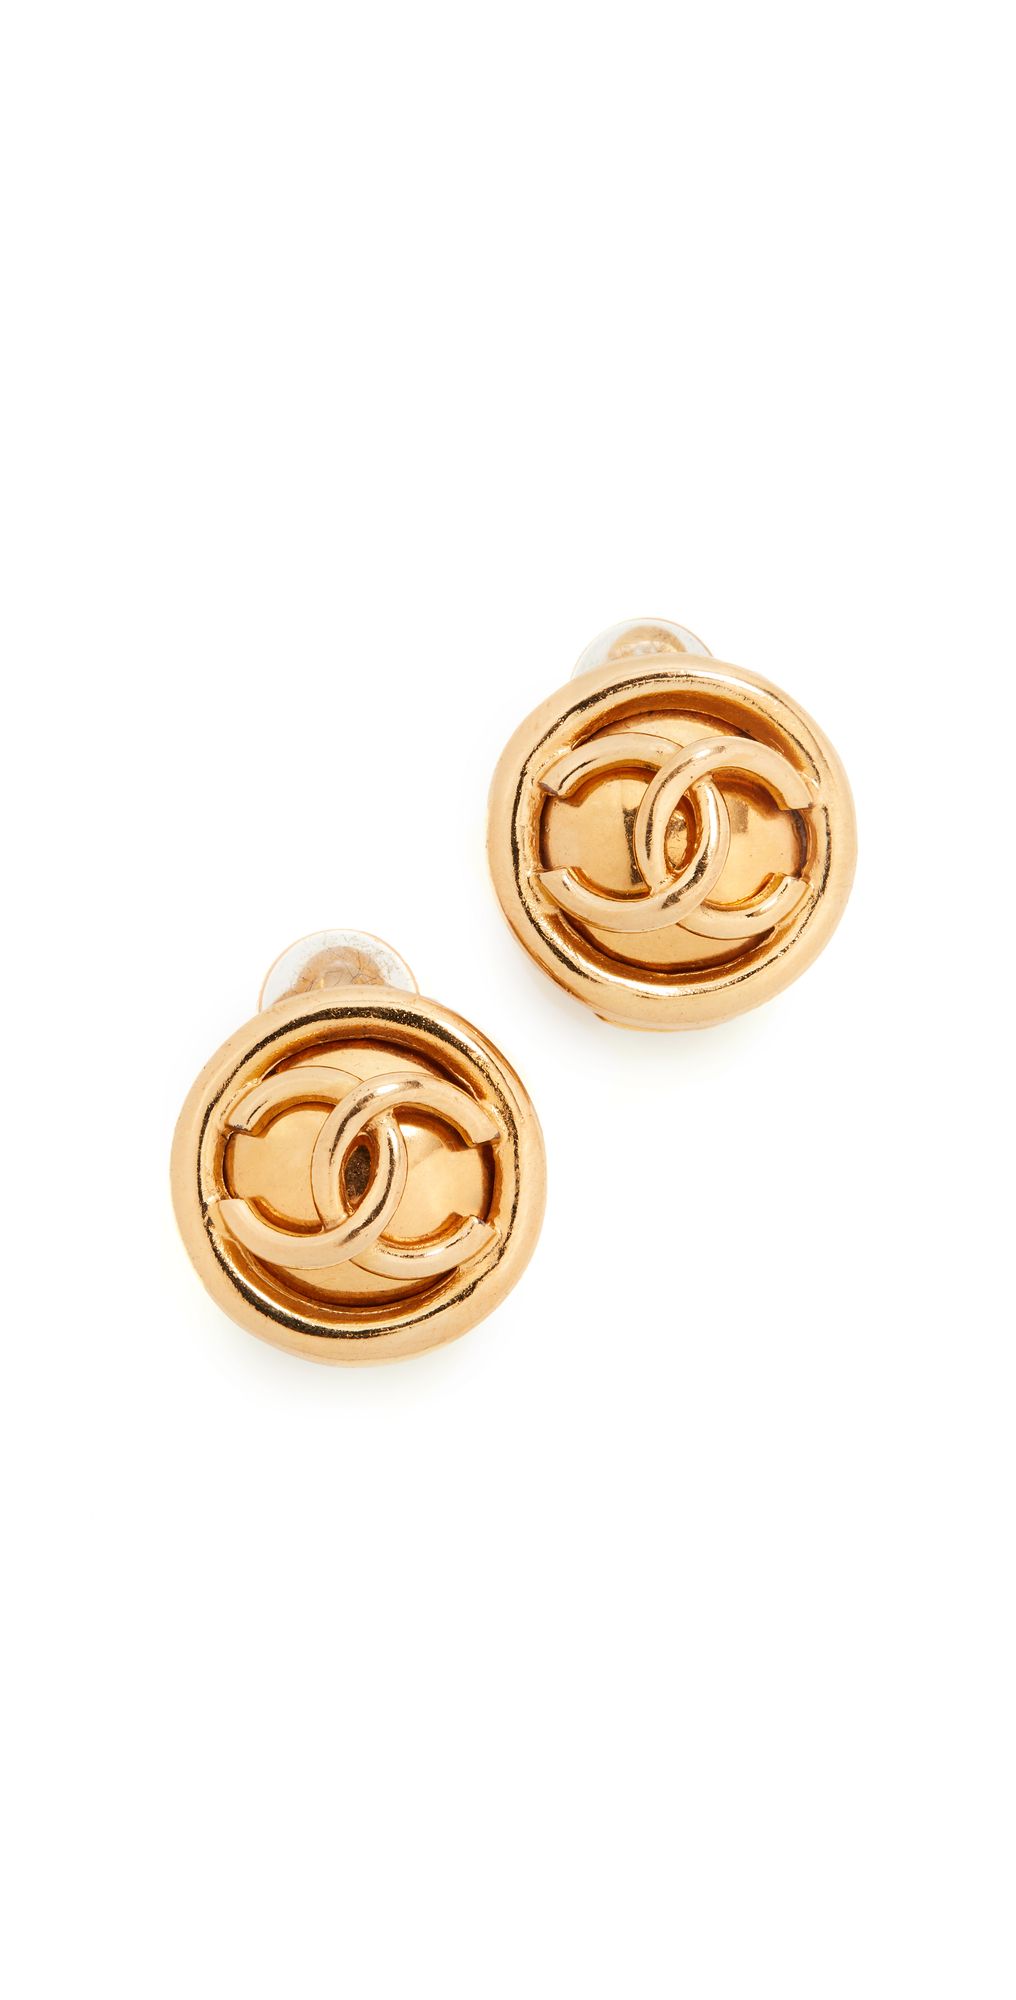 What Goes Around Comes Around Chanel Gold Button Earrings | Shopbop